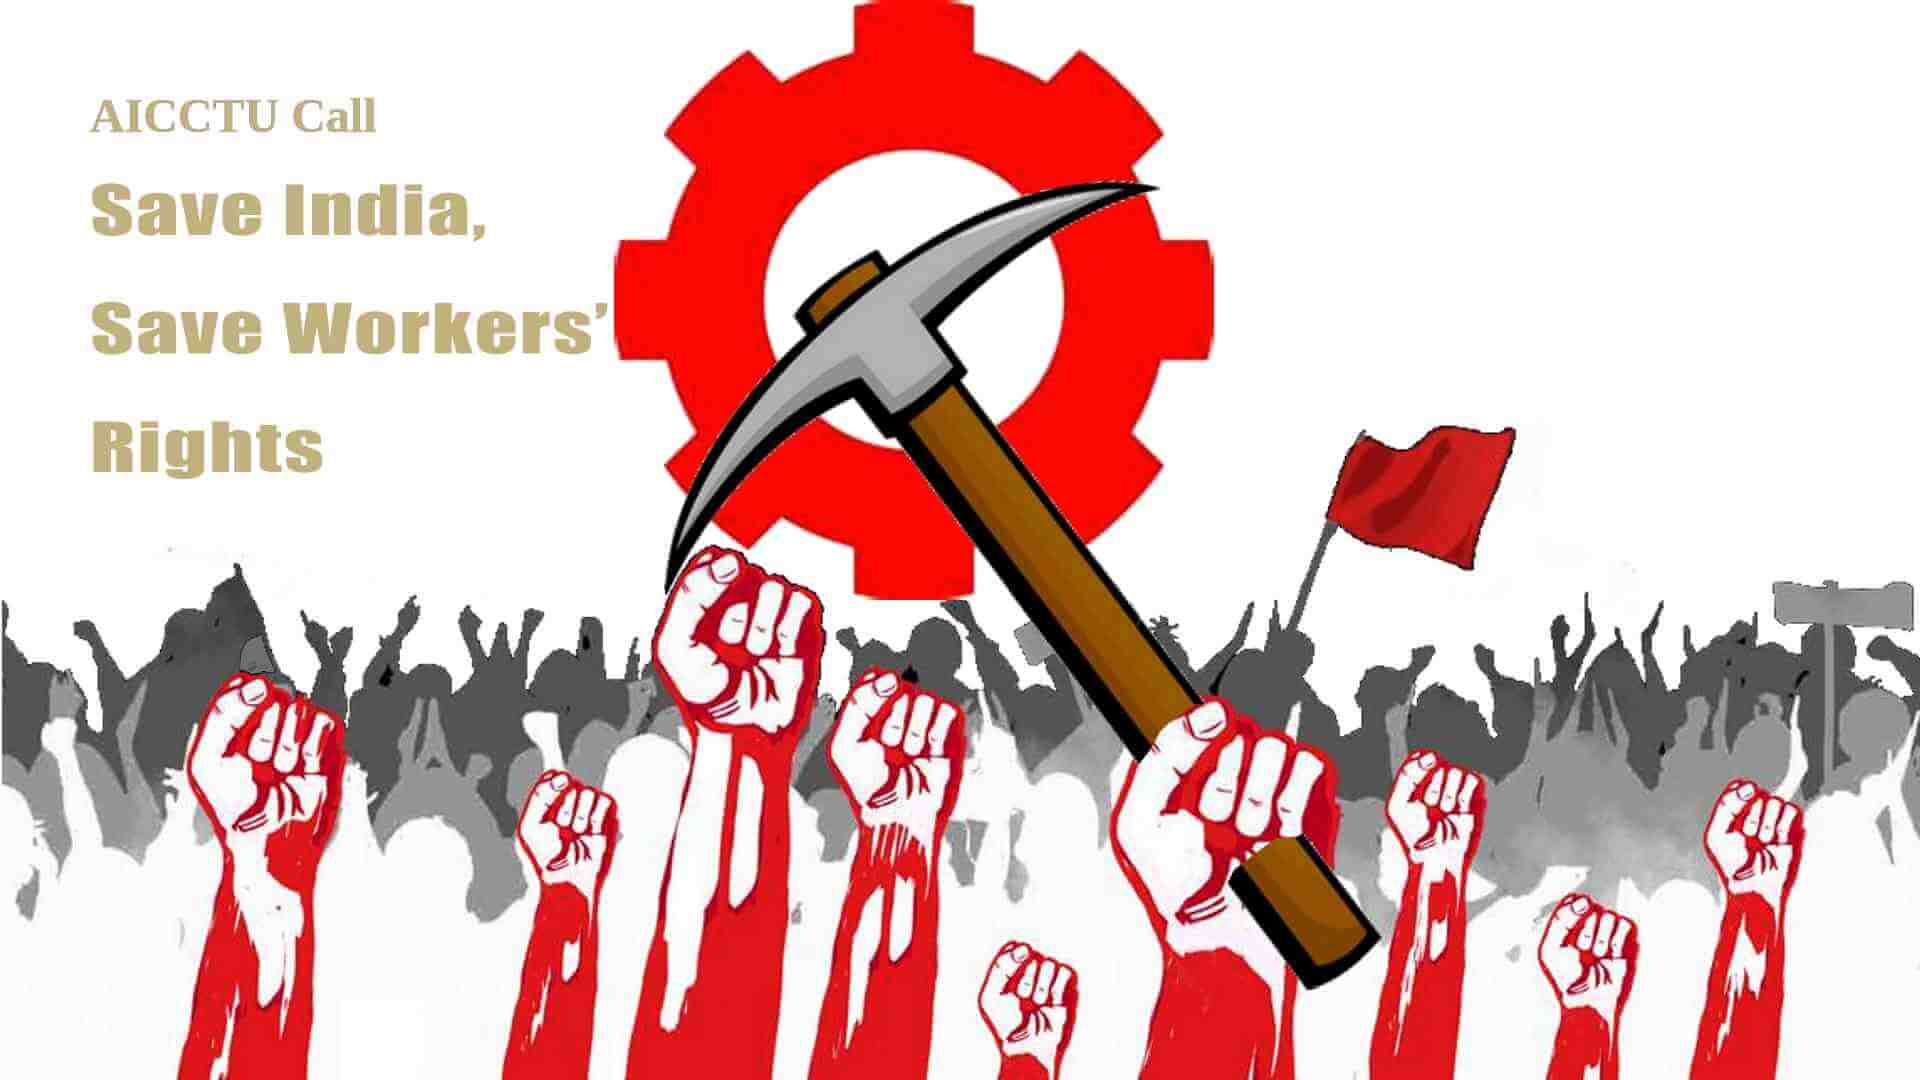 Save India, Save Workers’ Rights